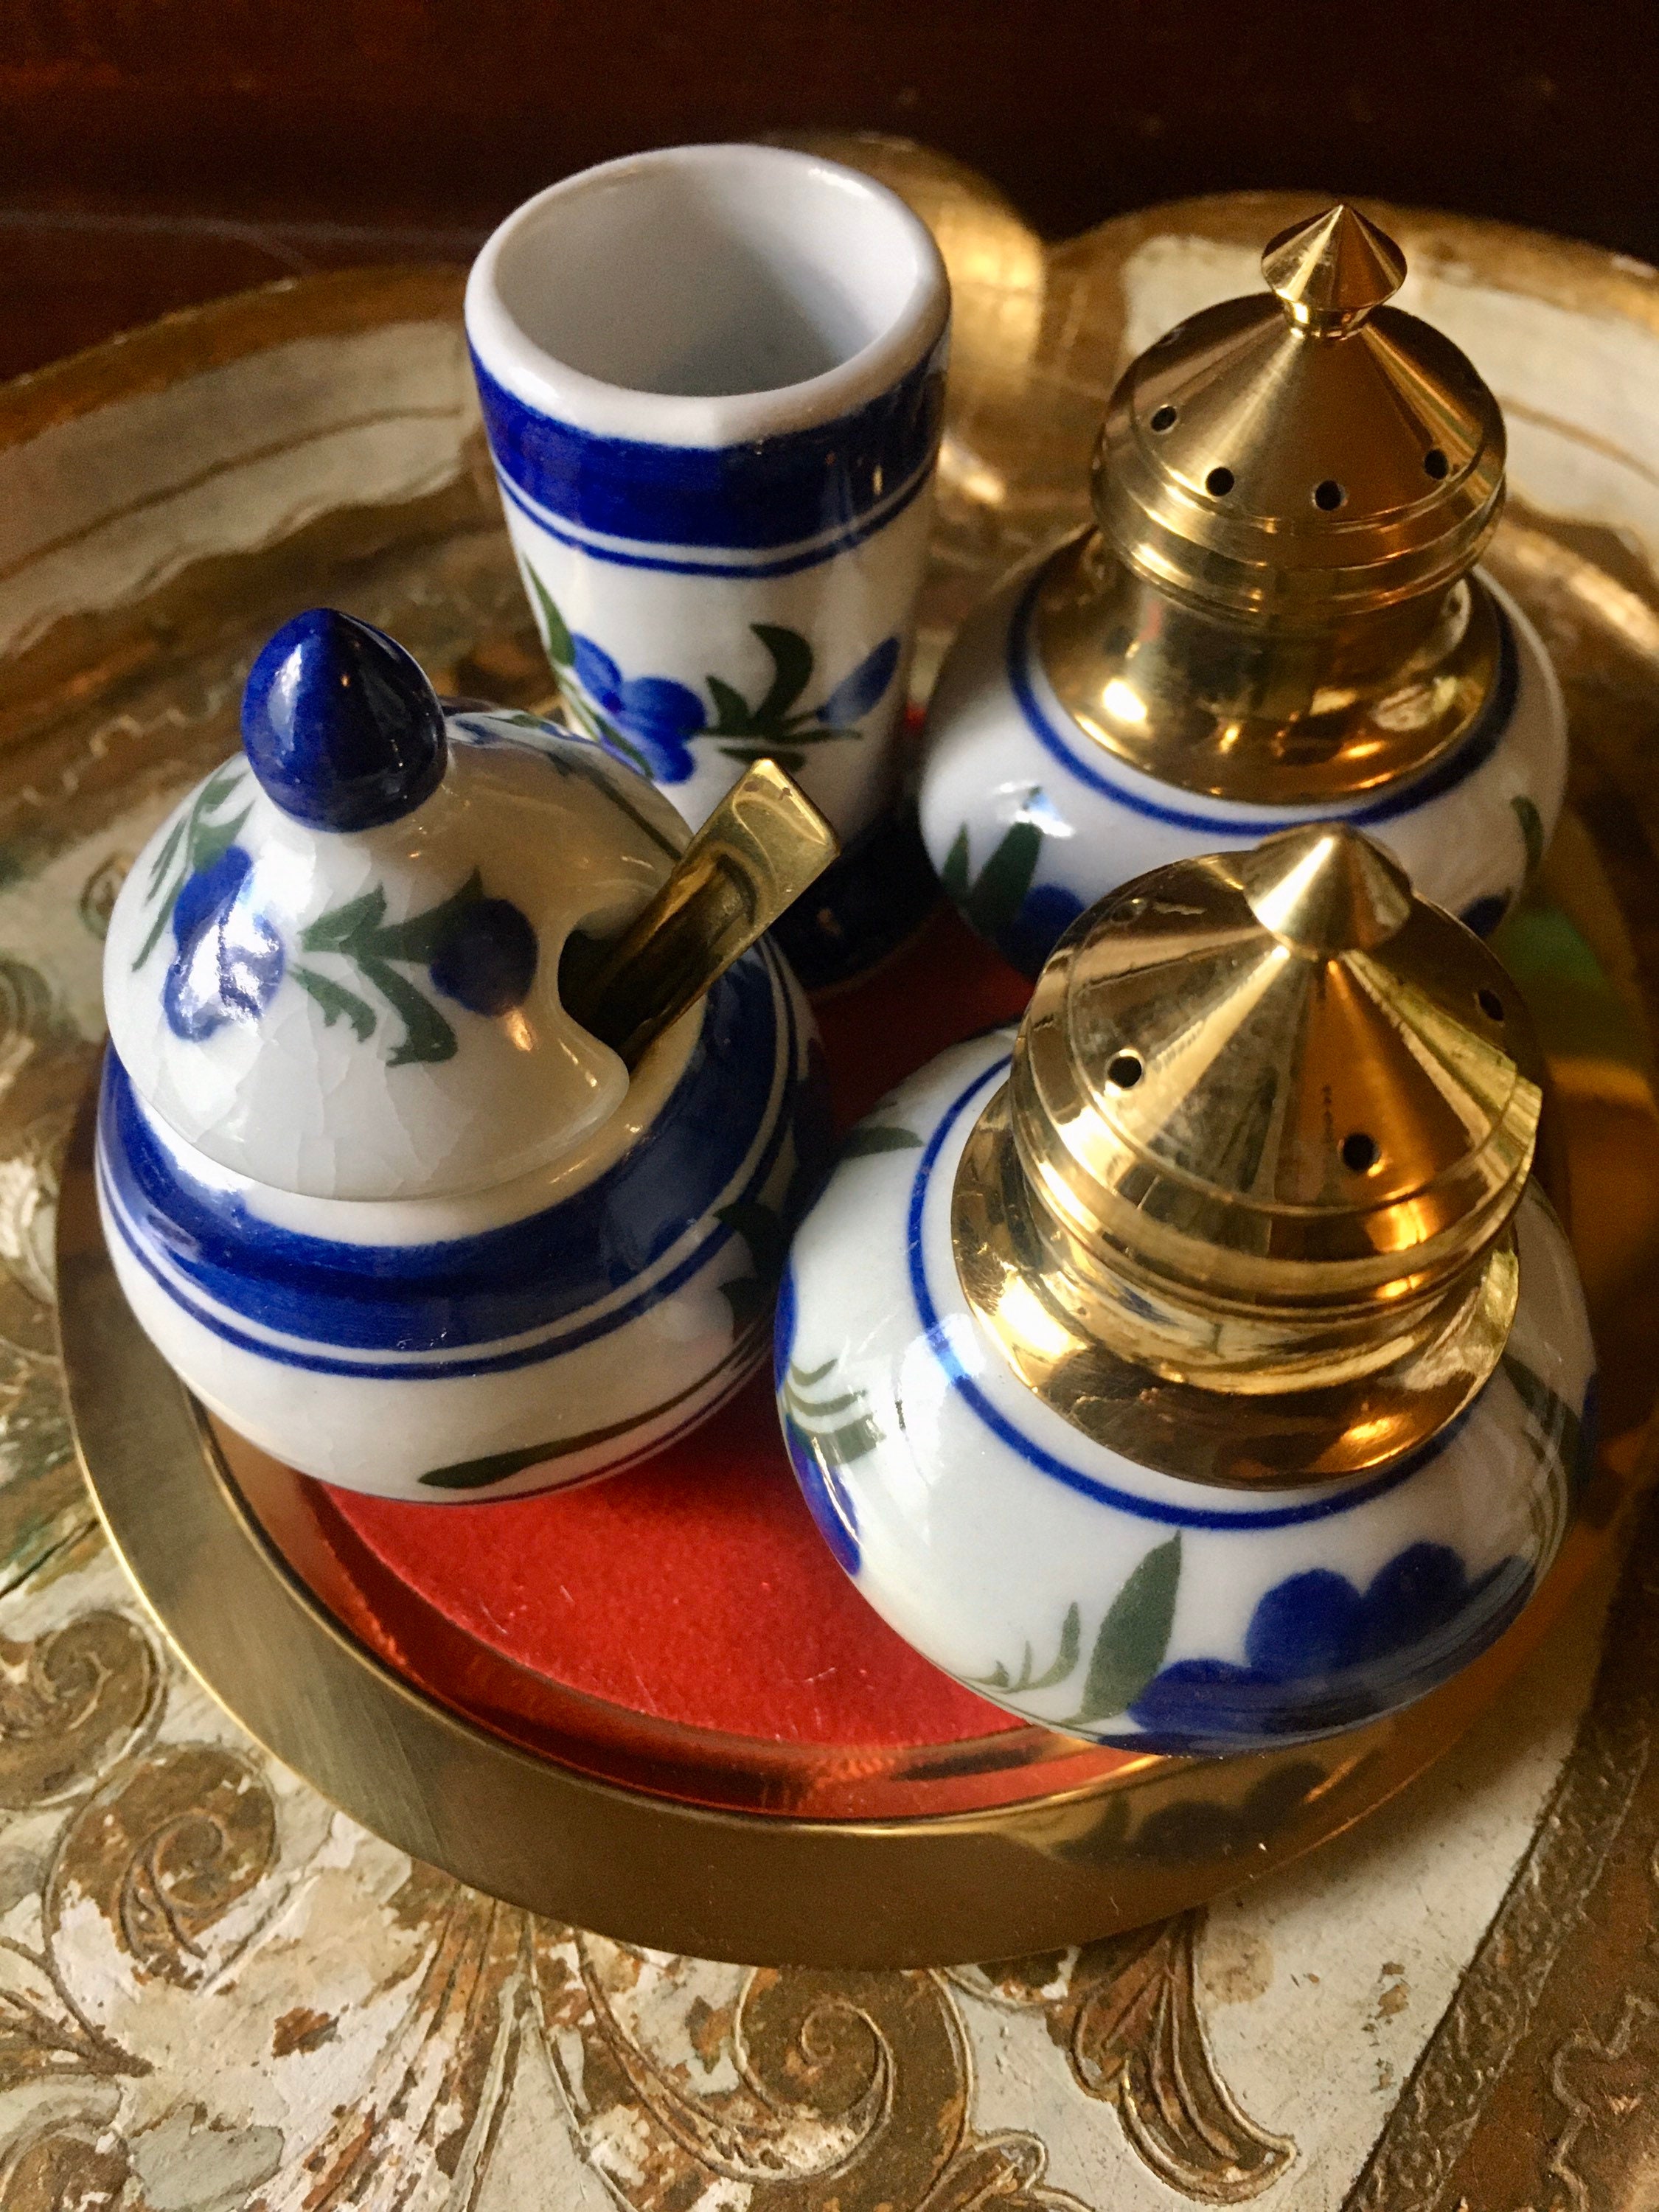 ceramic condiment set, ceramic condiment set Suppliers and Manufacturers at